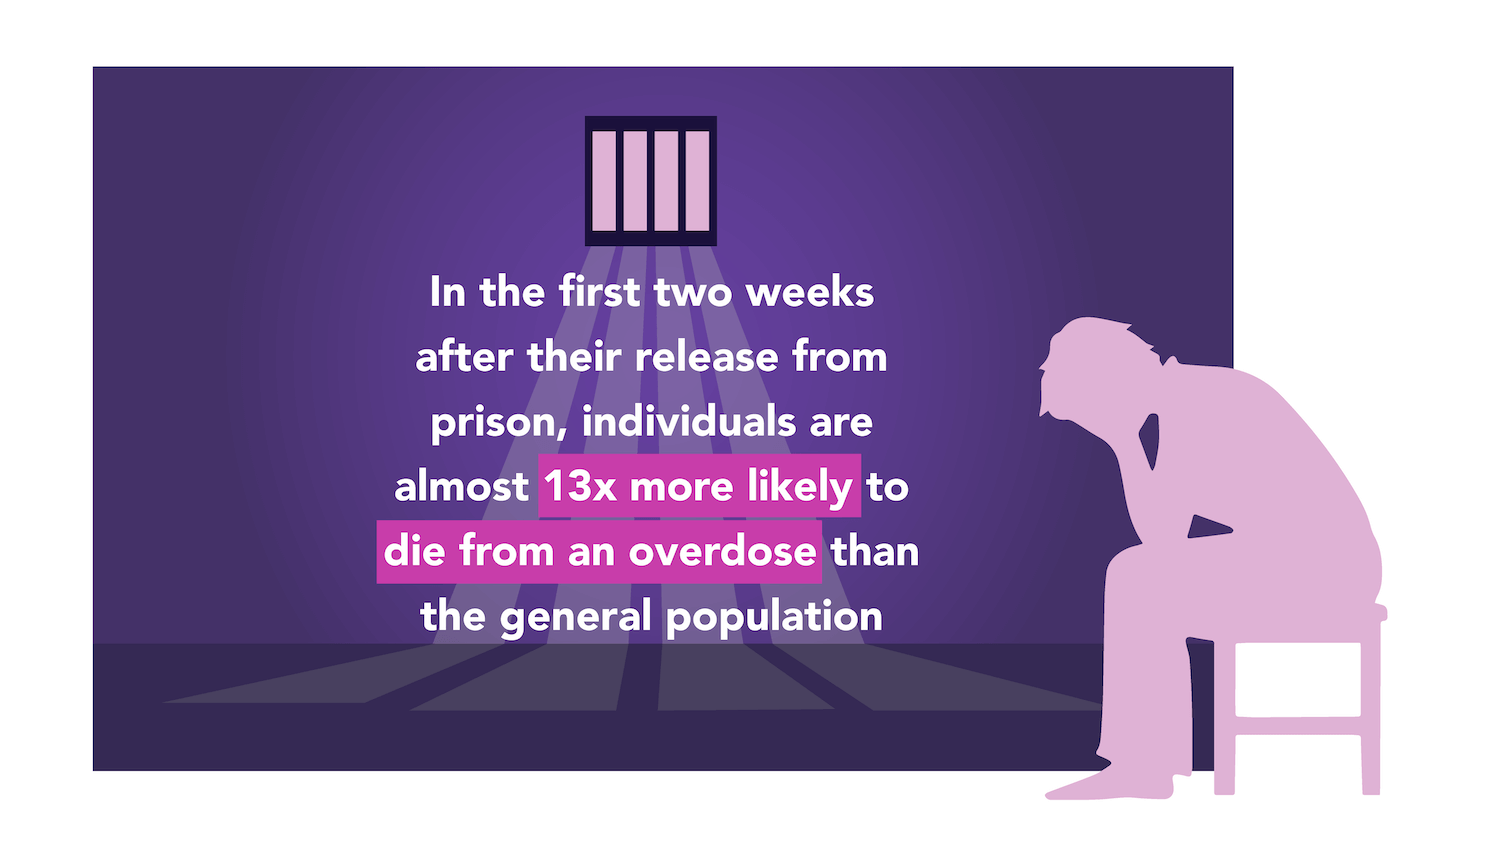 In the first two weeks after their release from prison, individuals are almost 13 times more likely to die from an overdose